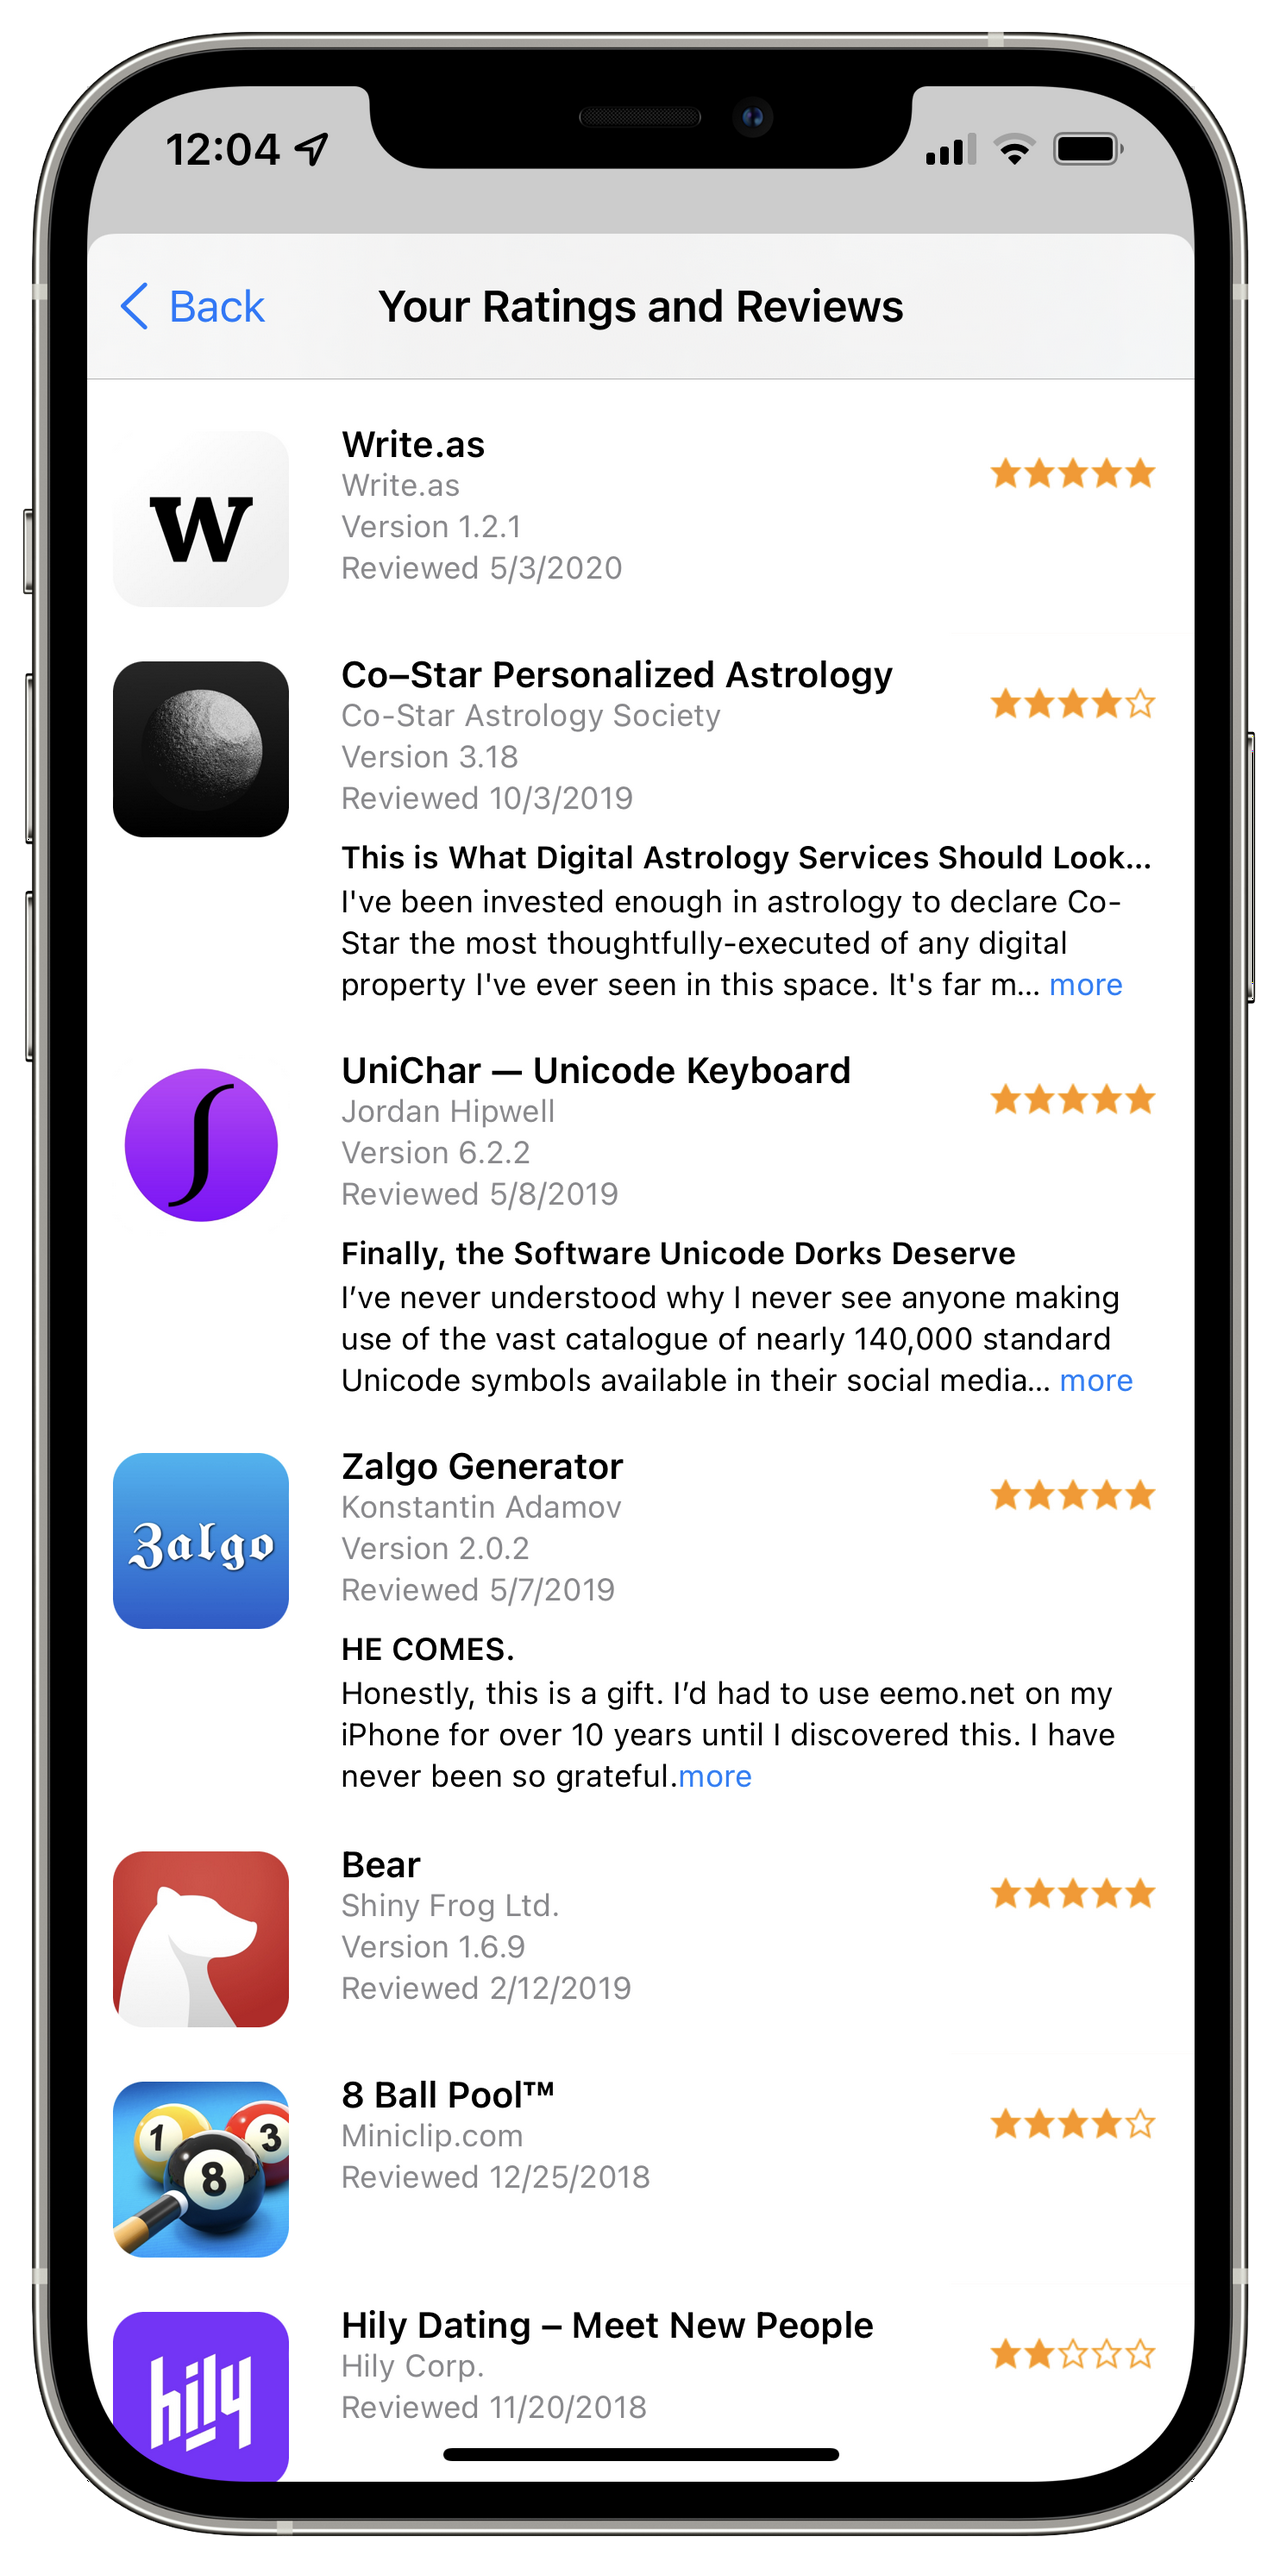 Your Ratings and Reviews - Apple App Store